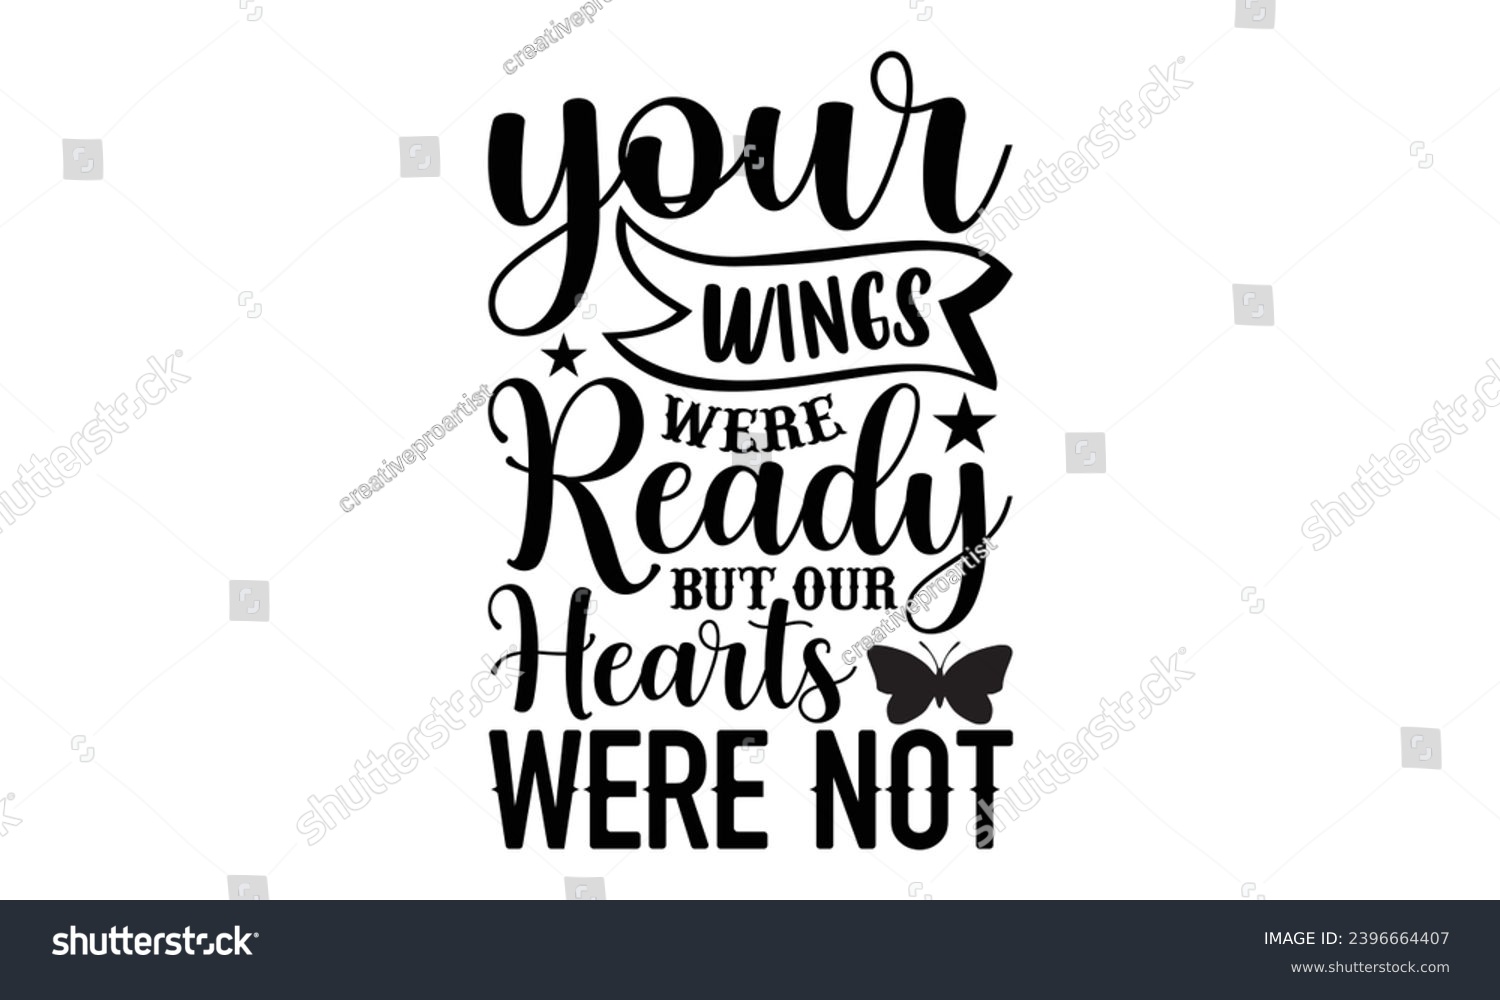 SVG of your wings were ready but our hearts were not- Butterfly t- shirt design, Handmade calligraphy vector illustration for Cutting Machine, Silhouette Cameo, Cricut, Vector illustration Template eps svg